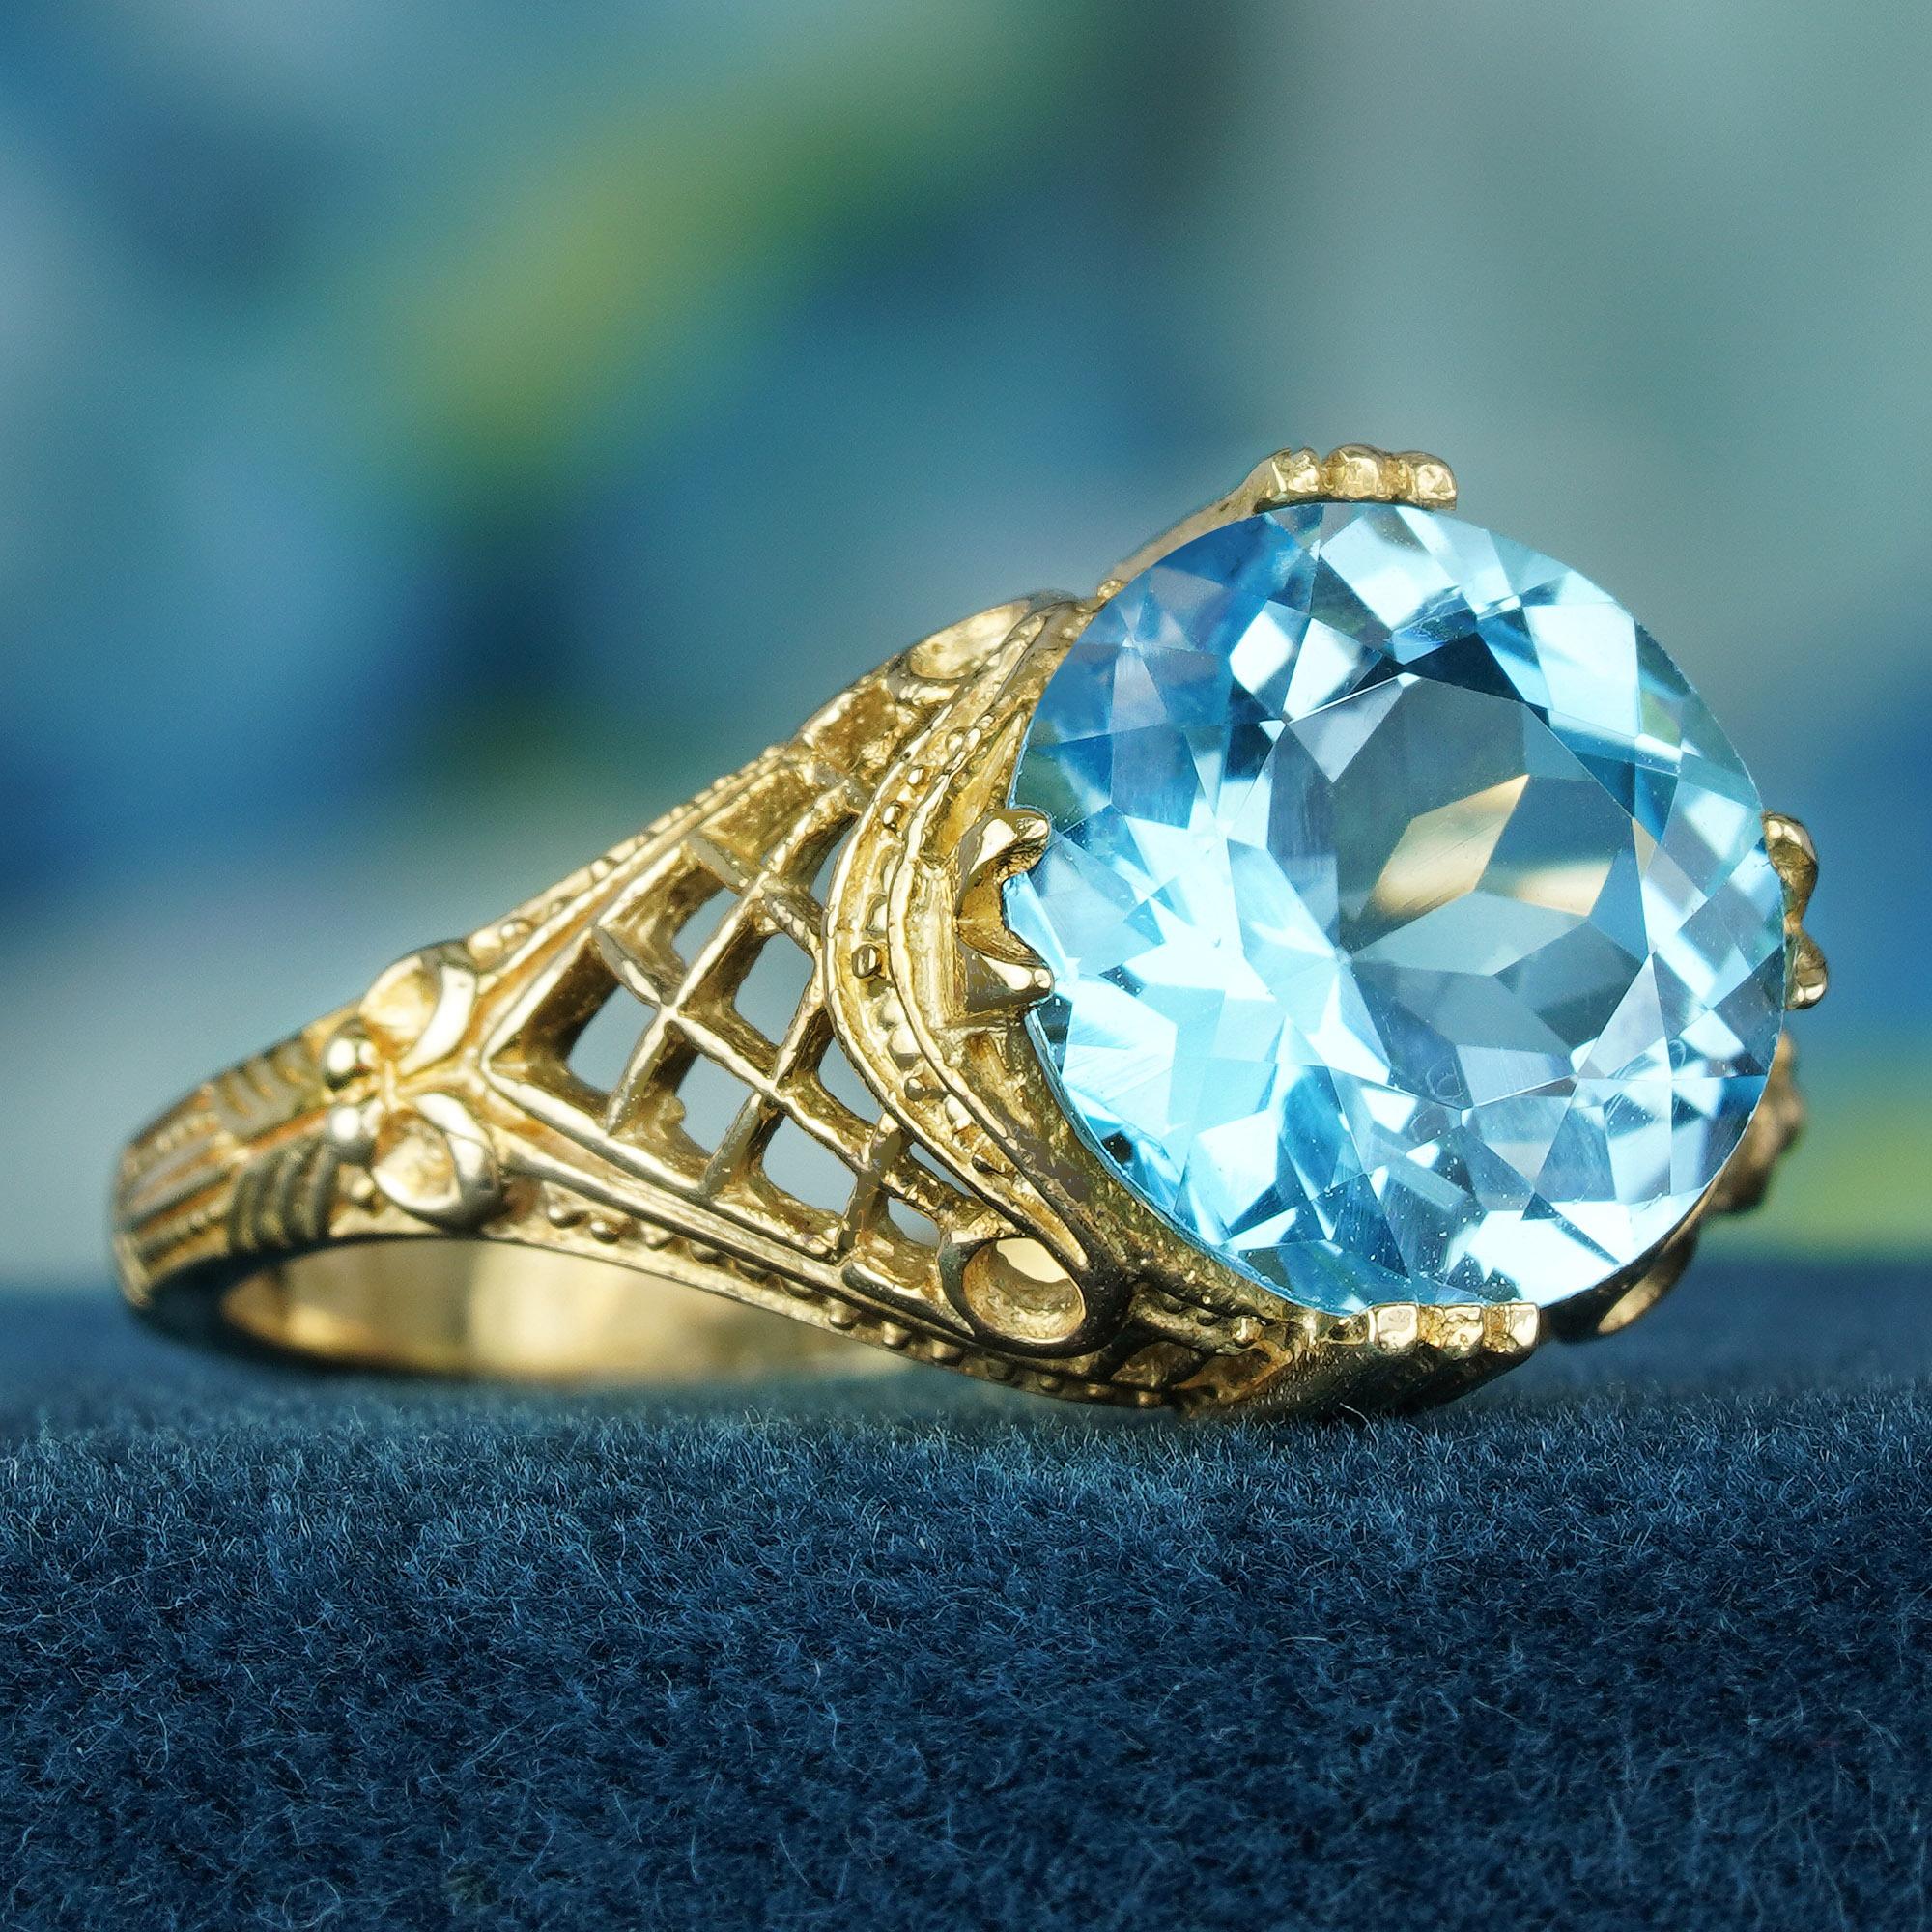 While boasting captivating details, the 4.5 carat blue topaz ring effortlessly radiates an enduring sense of elegance. The timeless allure is achieved through the combination of a traditional yellow gold band, an elaborate filigree pattern, and the